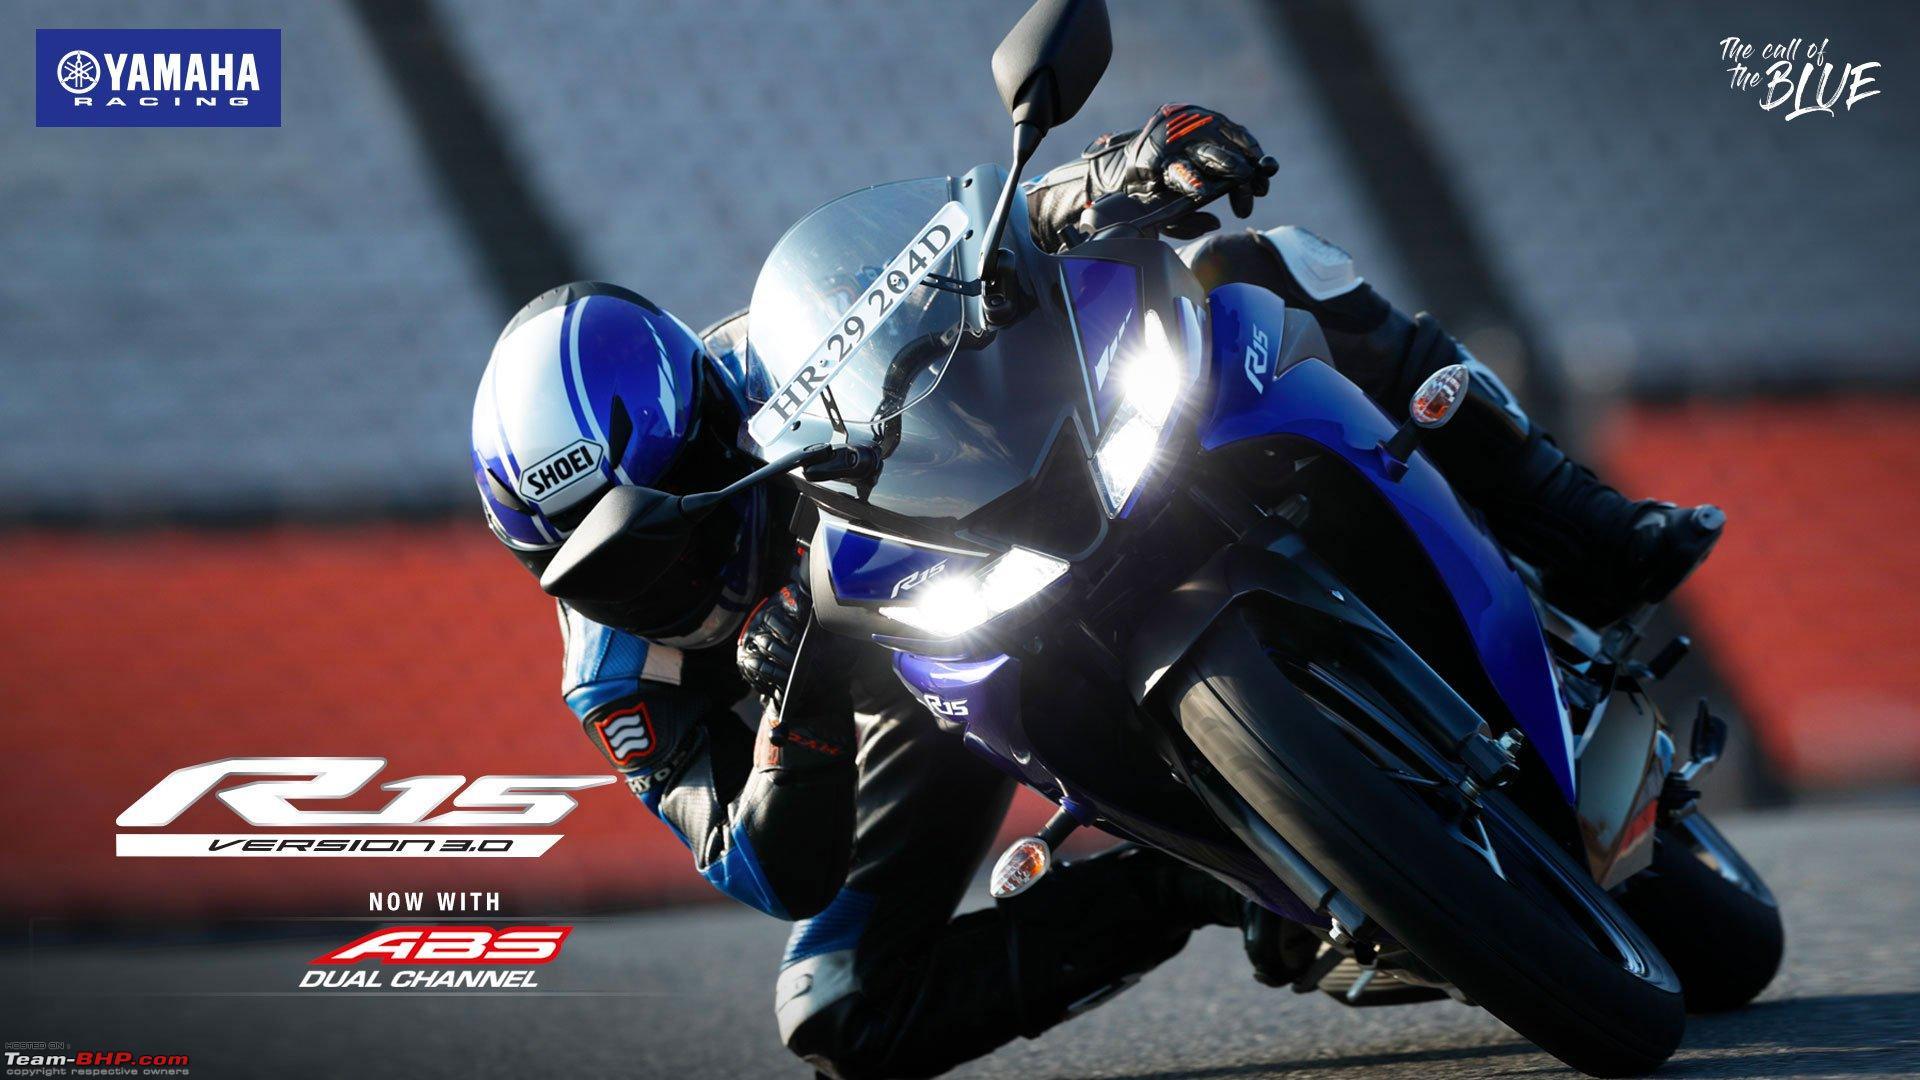 Yamaha YZF R15 V3.0 With Dual Channel ABS Launched At Rs. 1.39